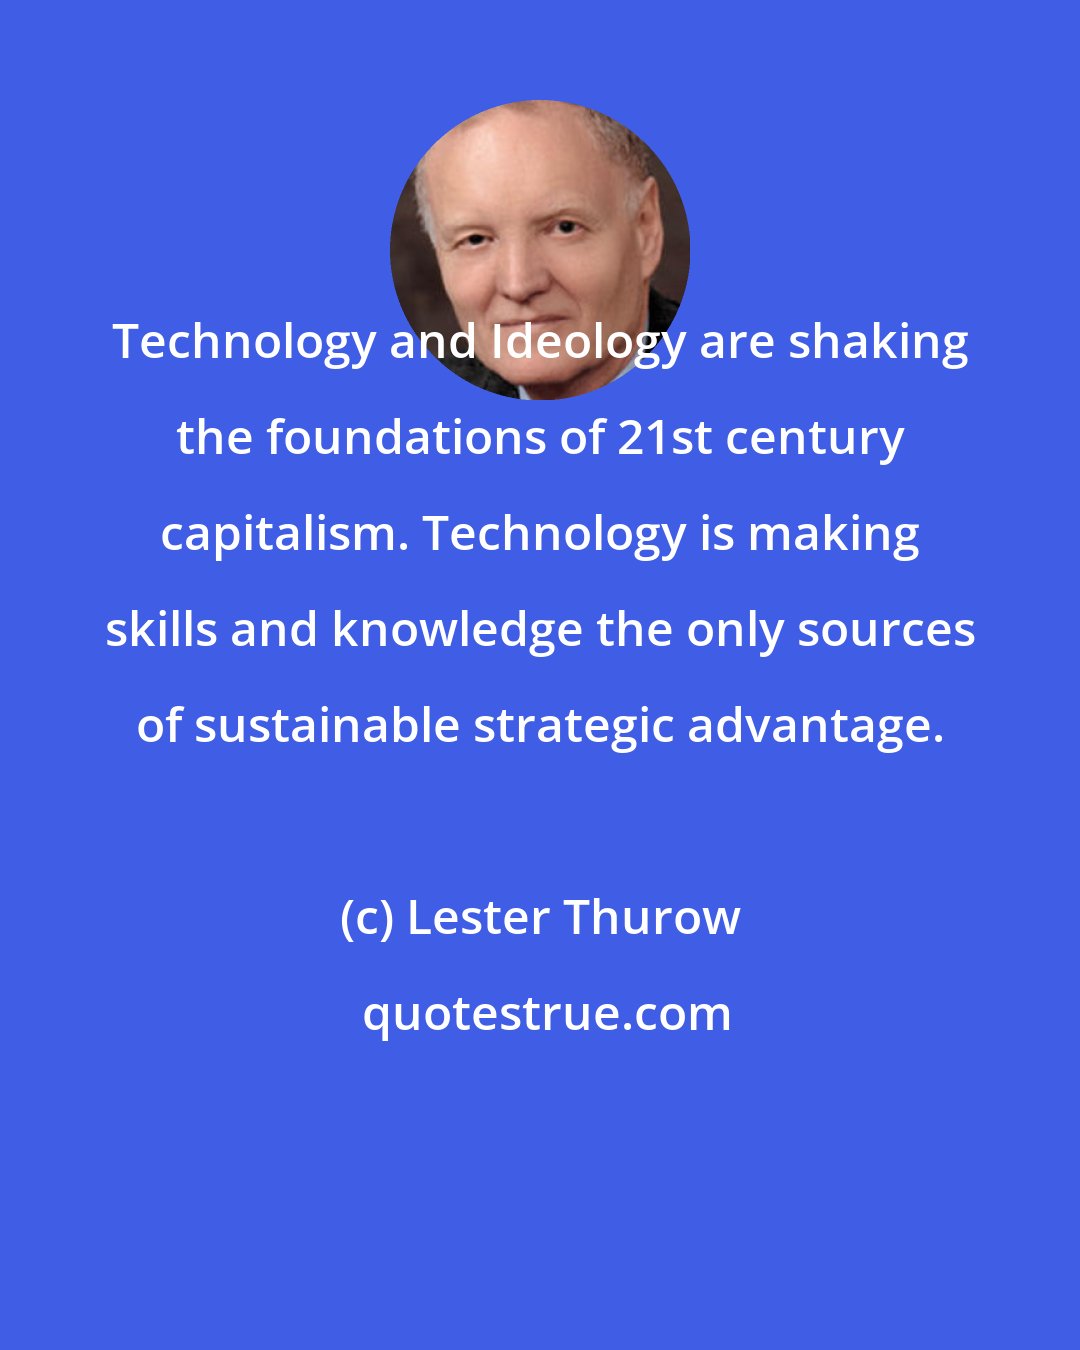 Lester Thurow: Technology and Ideology are shaking the foundations of 21st century capitalism. Technology is making skills and knowledge the only sources of sustainable strategic advantage.